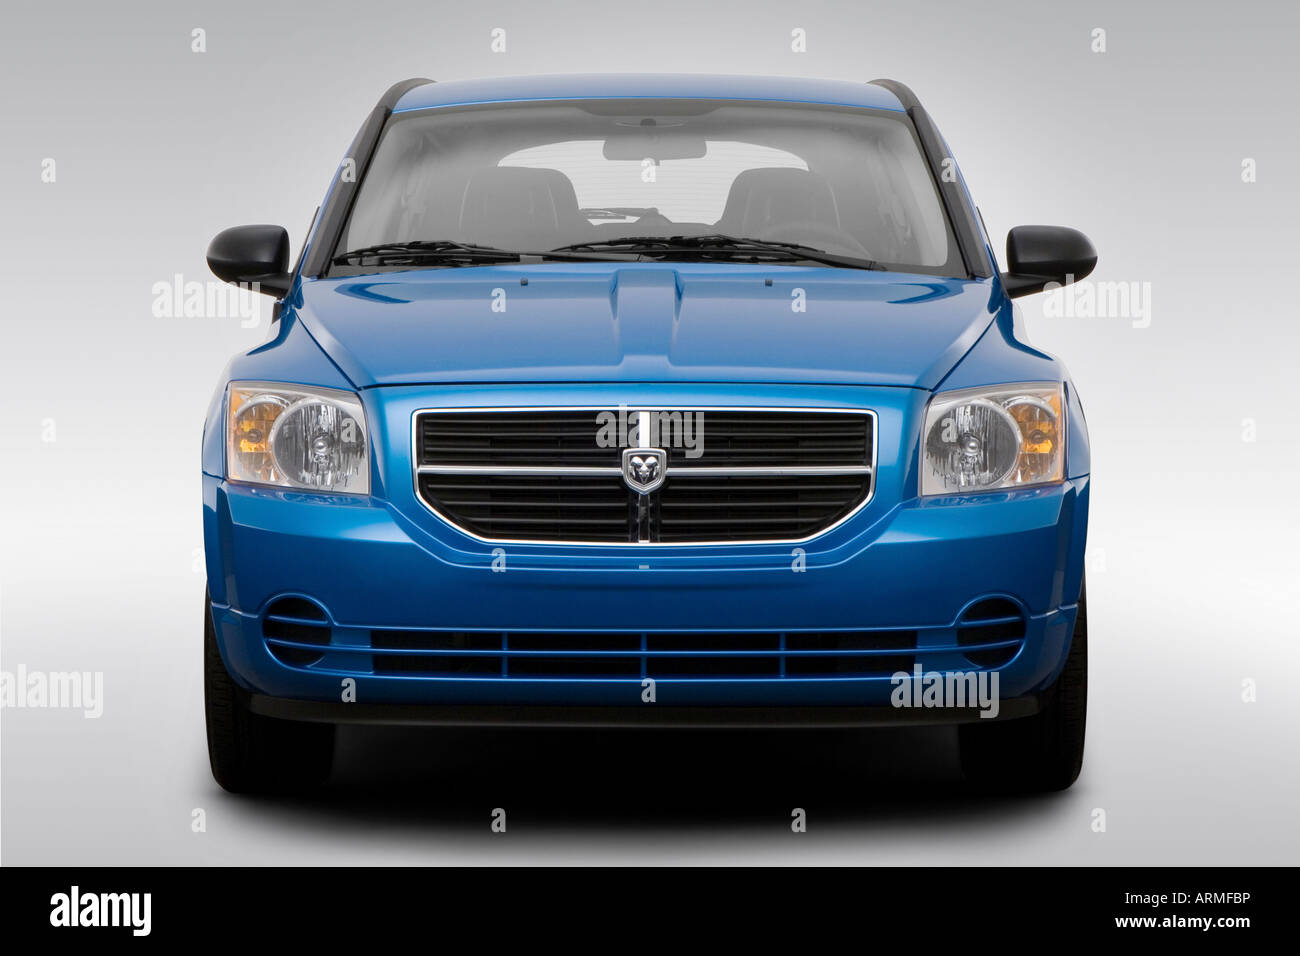 2008 Dodge Caliber SXT in Blue - Low/Wide Front Stock Photo - Alamy